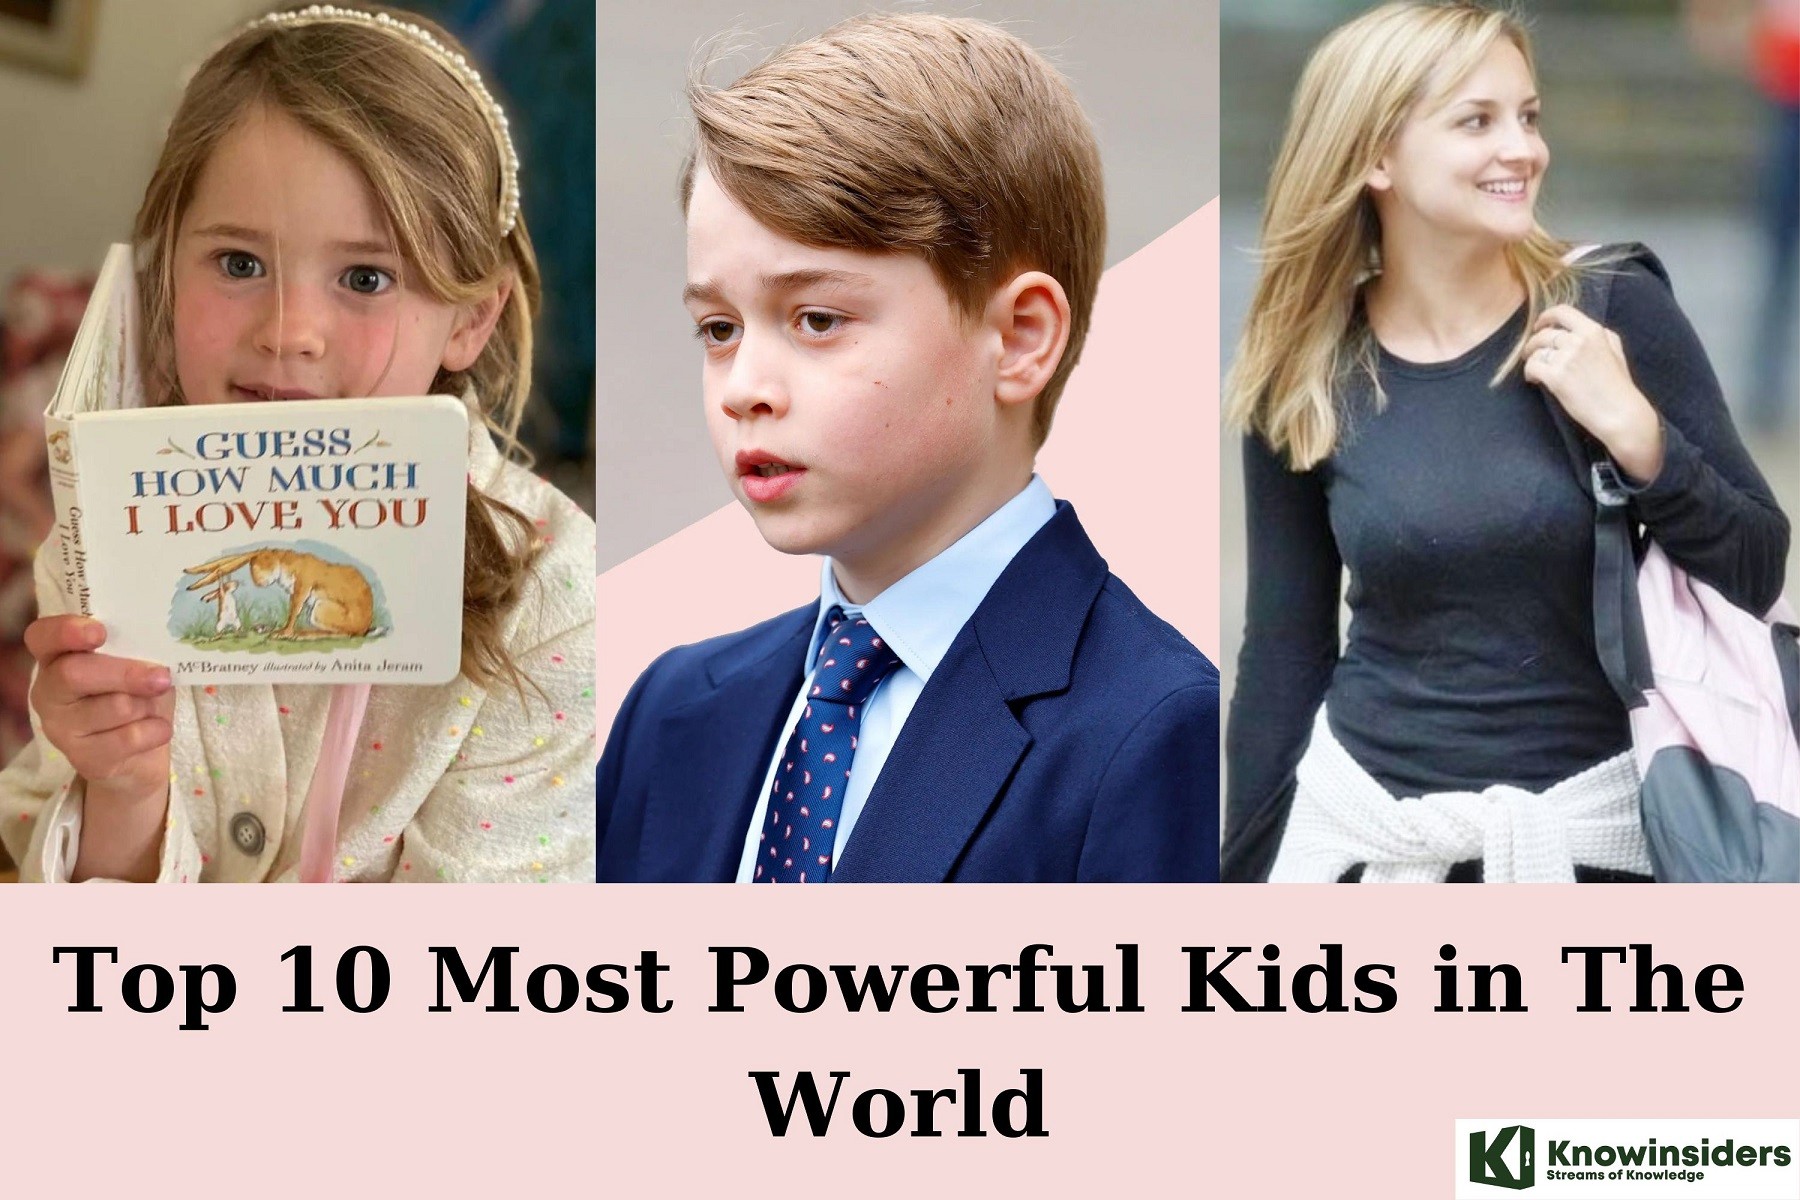 Top 10 Most Powerful Kids in The World 2023/2024